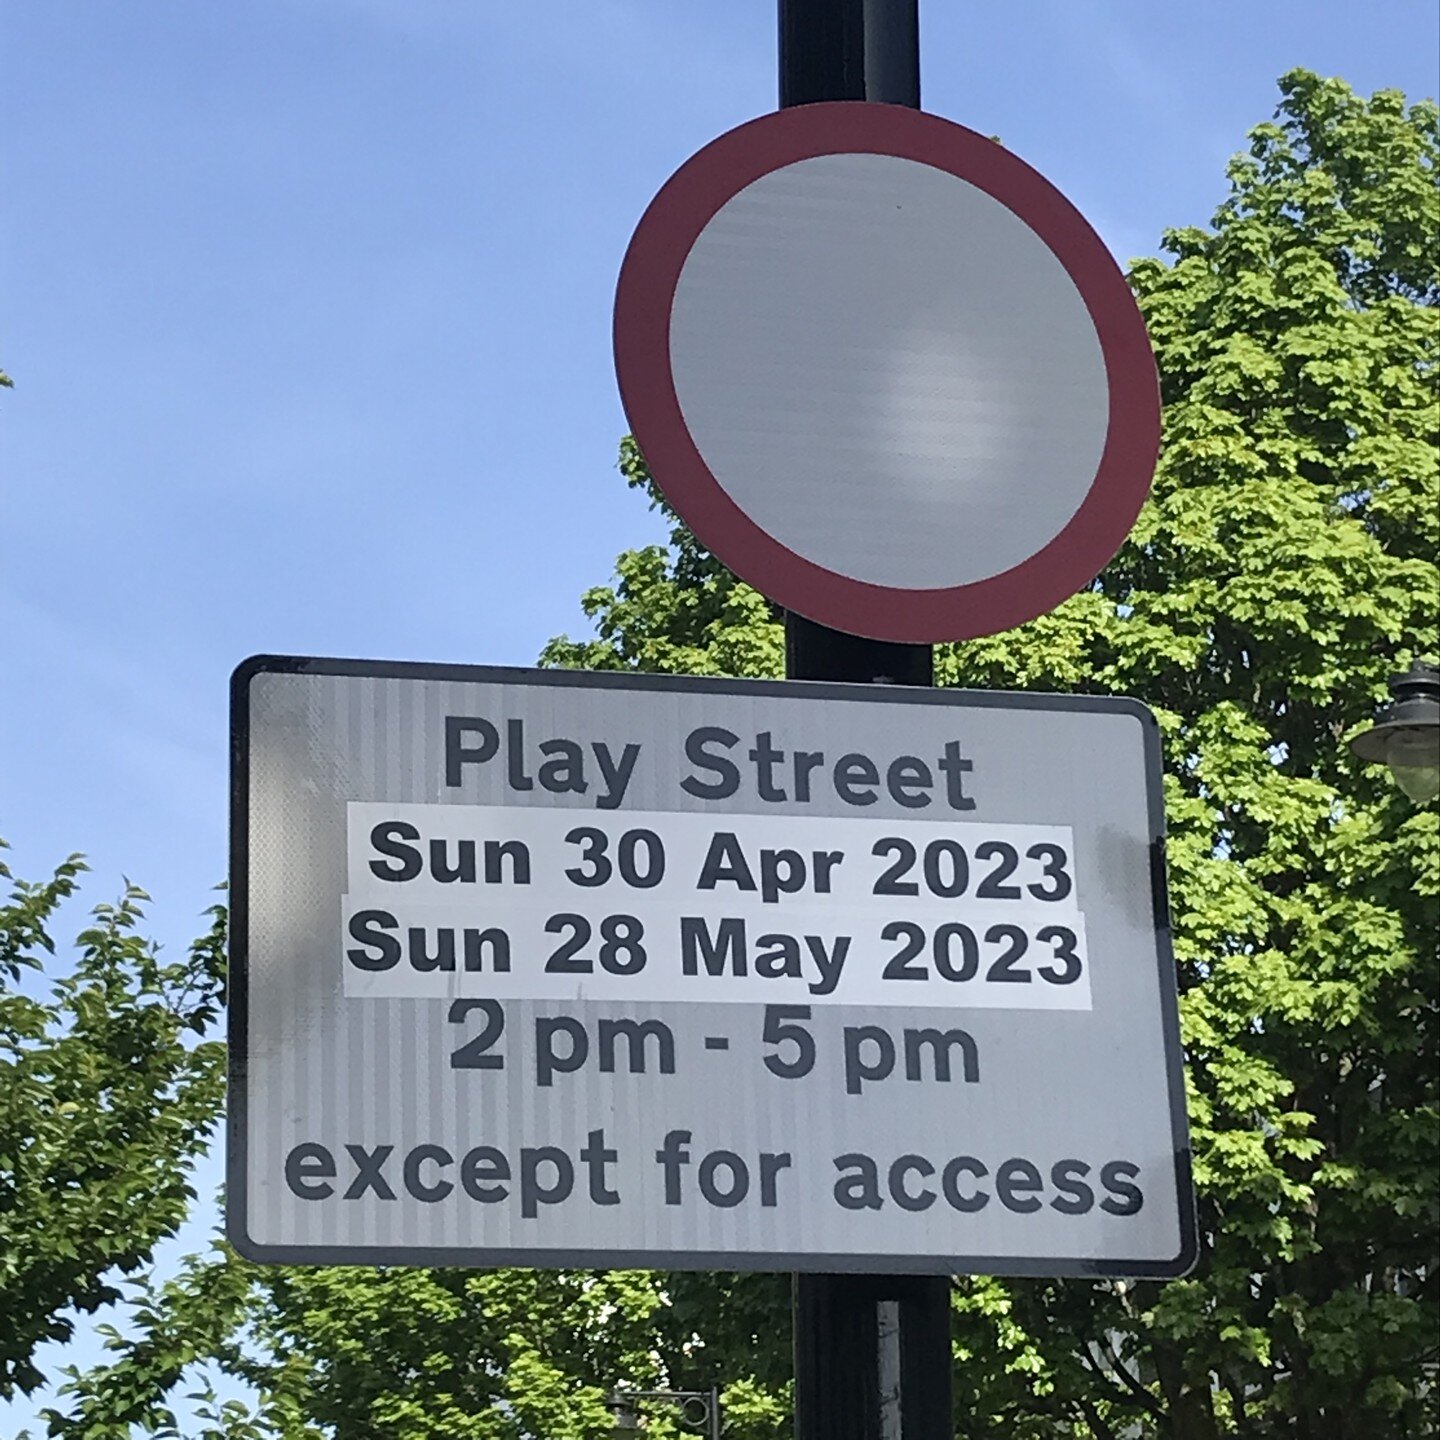 No need to wait for a coronation for a street party - around the corner from our studio is Offord Road which becomes a 'play street' once a month! Wonderful to see. Well done Offord Road and Islington. 

More at playingout.net and londonplaystreets.o